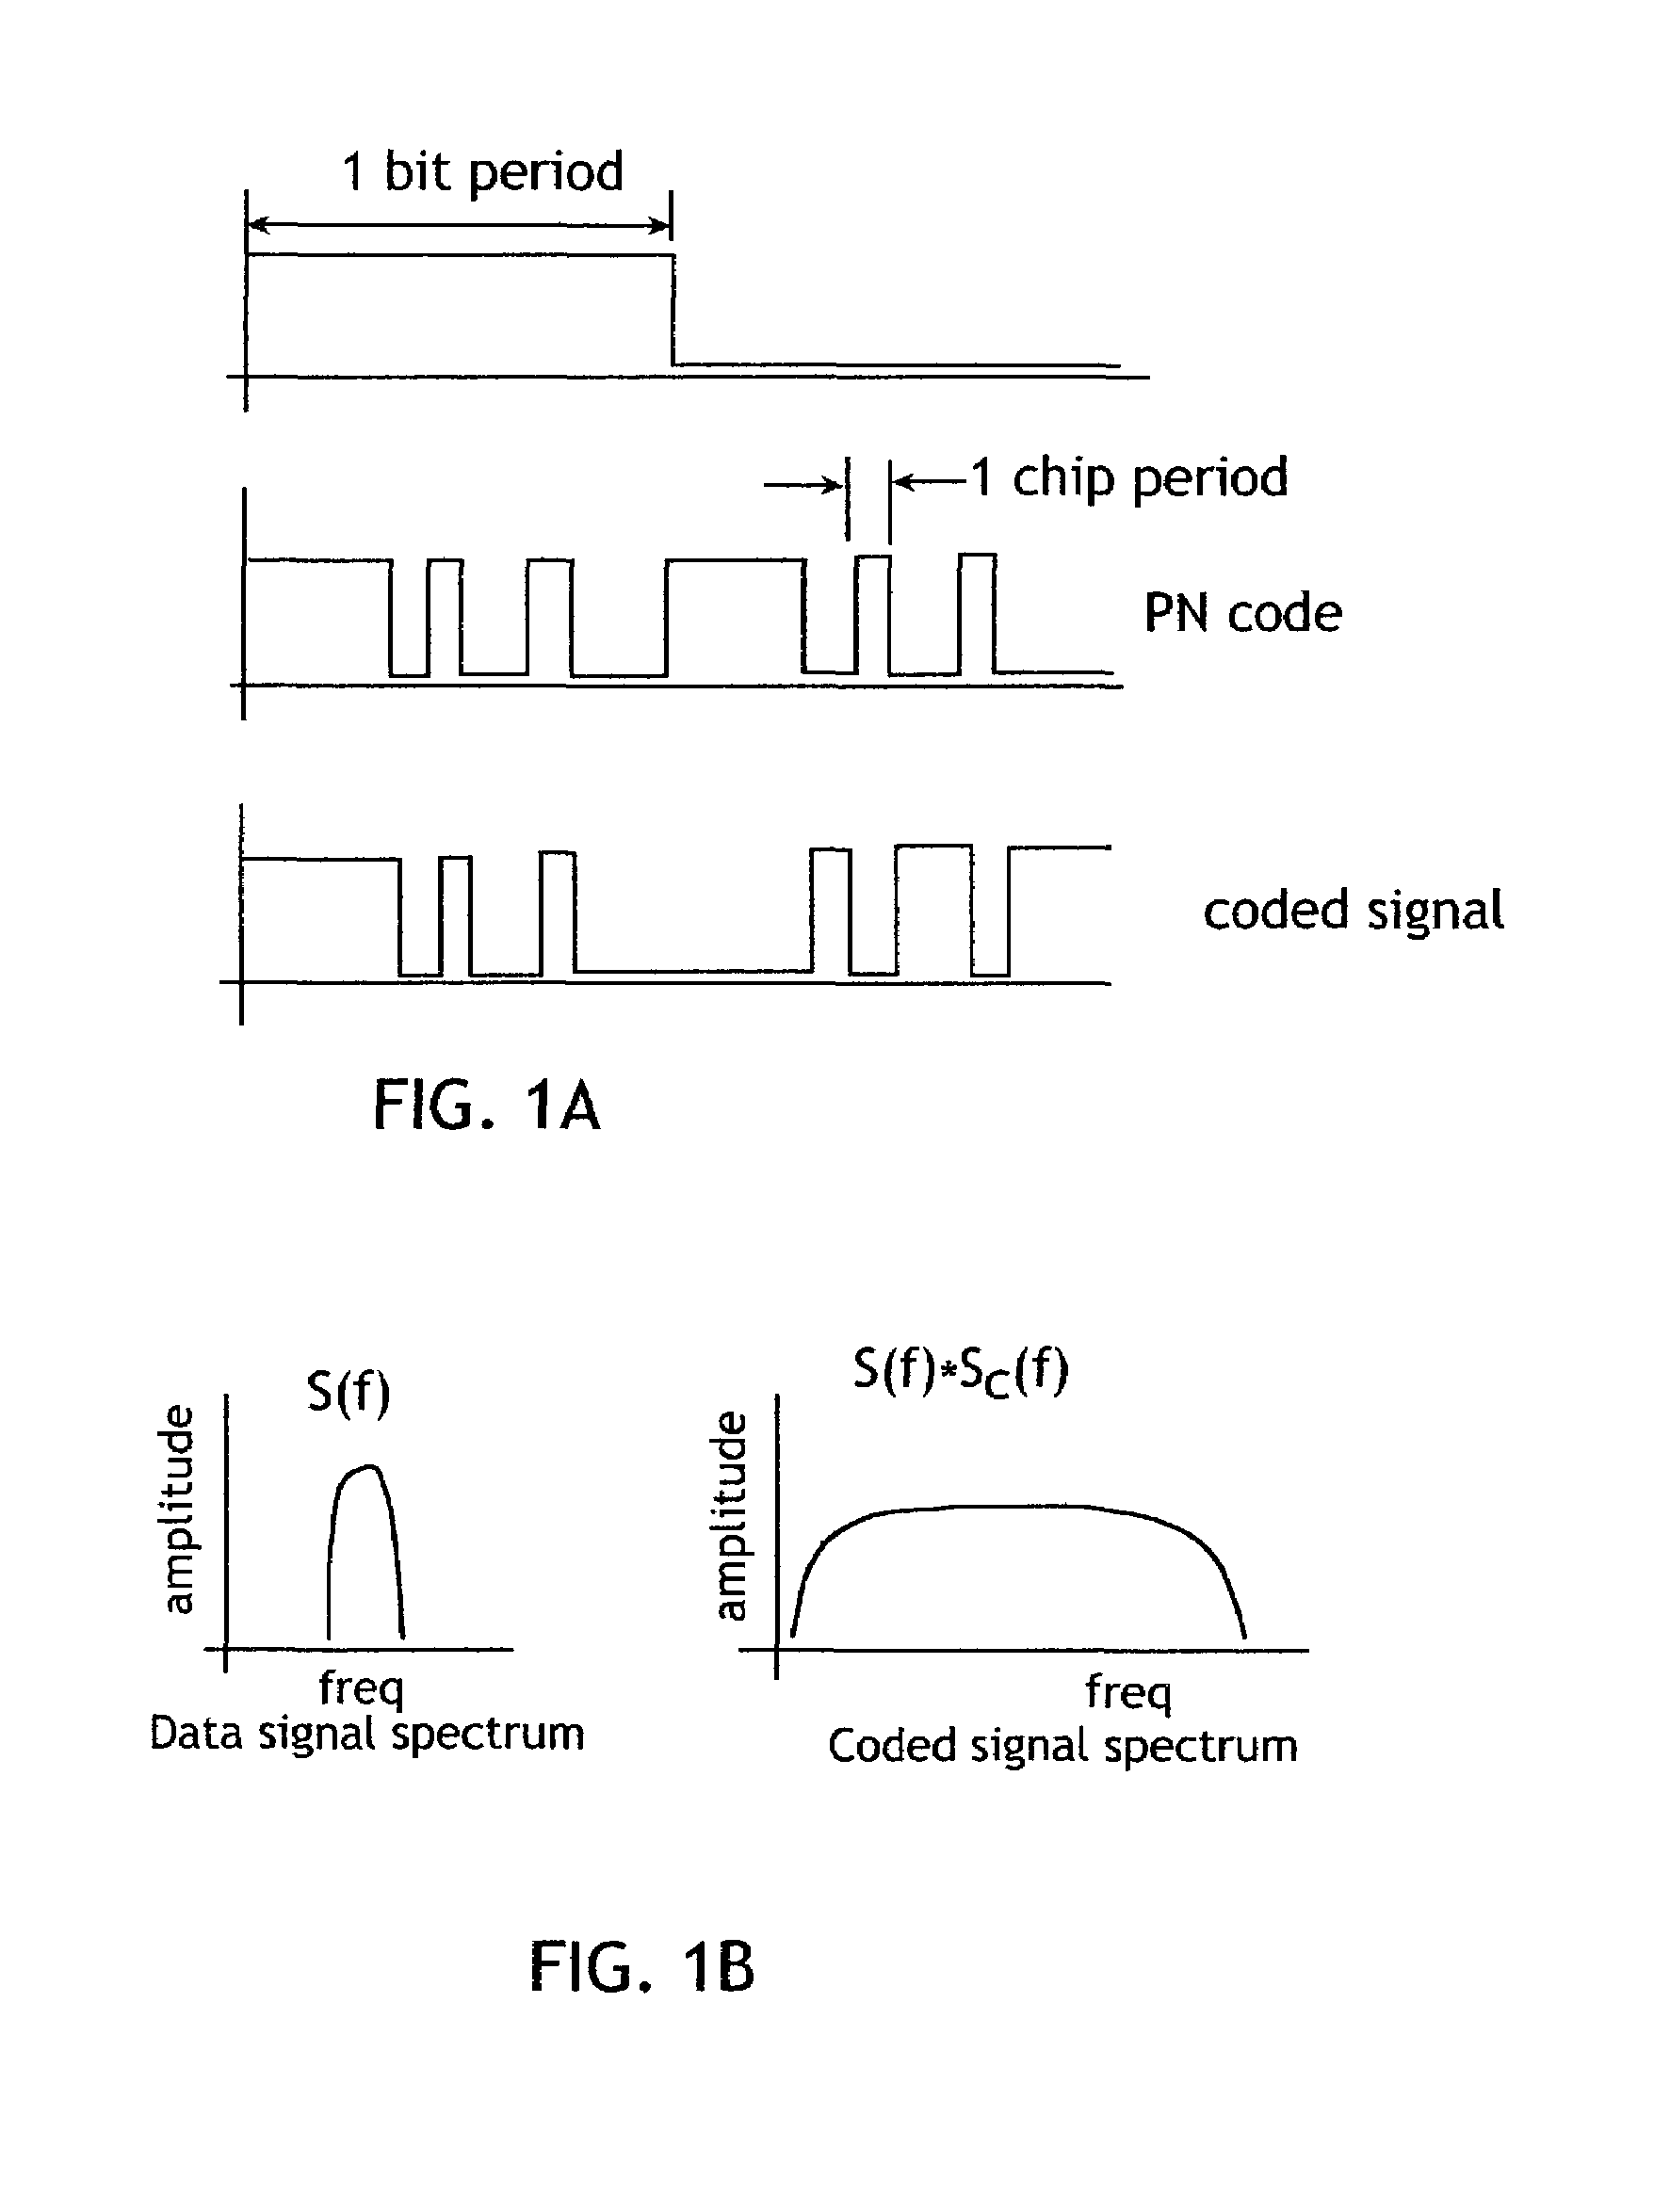 Method and apparatus for a touch sensitive system employing direct sequence spread spectrum (DSSS) technology